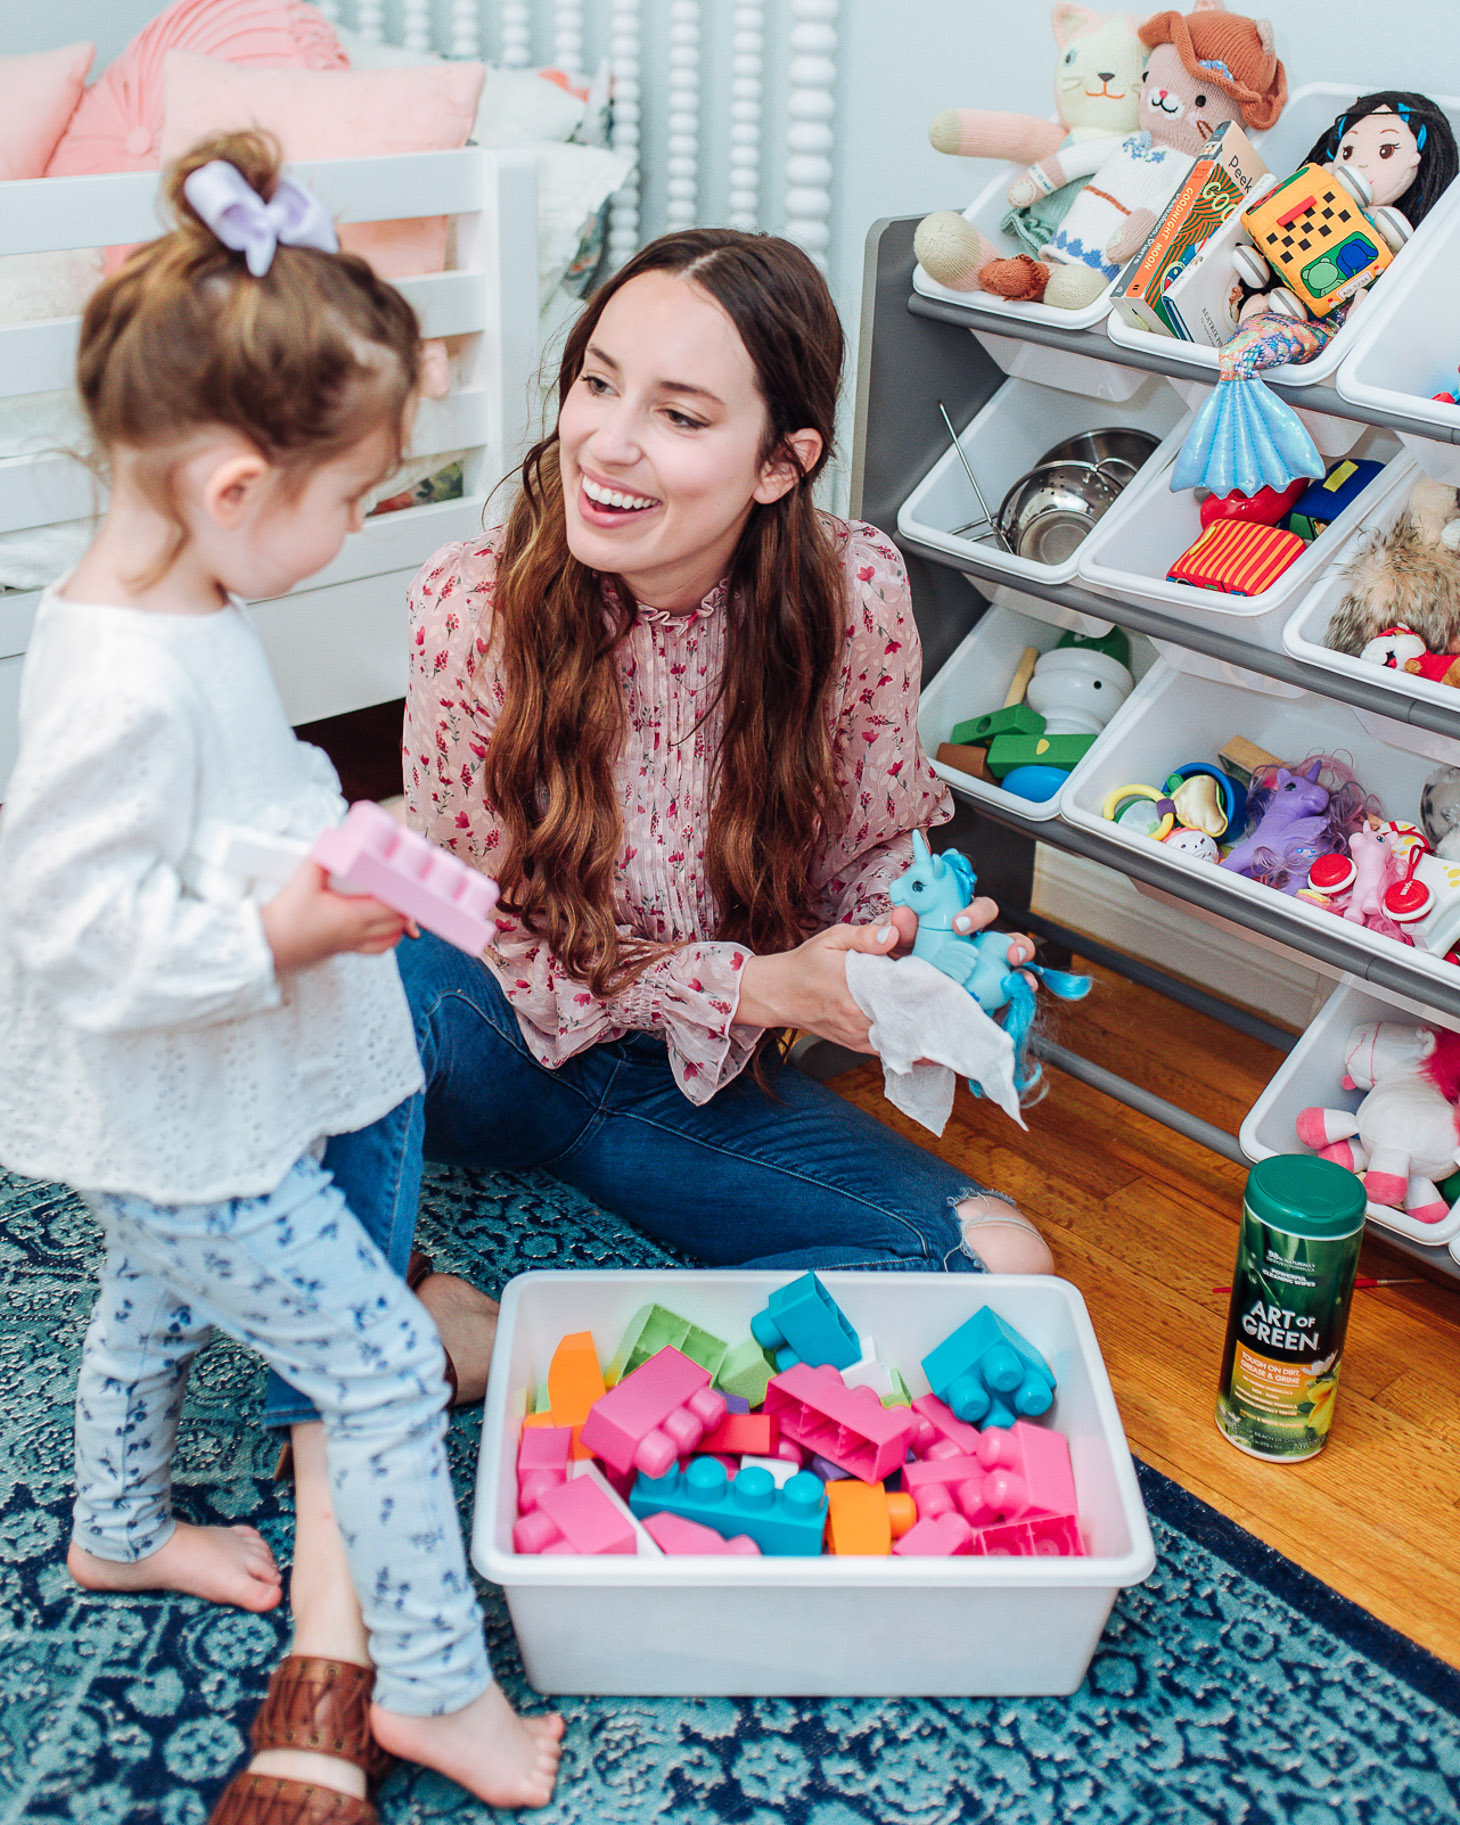 Essential Green Spring Cleaning Tips featured by top US lifestyle blog, Lone Star Looking Glass: image of a woman cleaning toys with Art of Green cleaning products